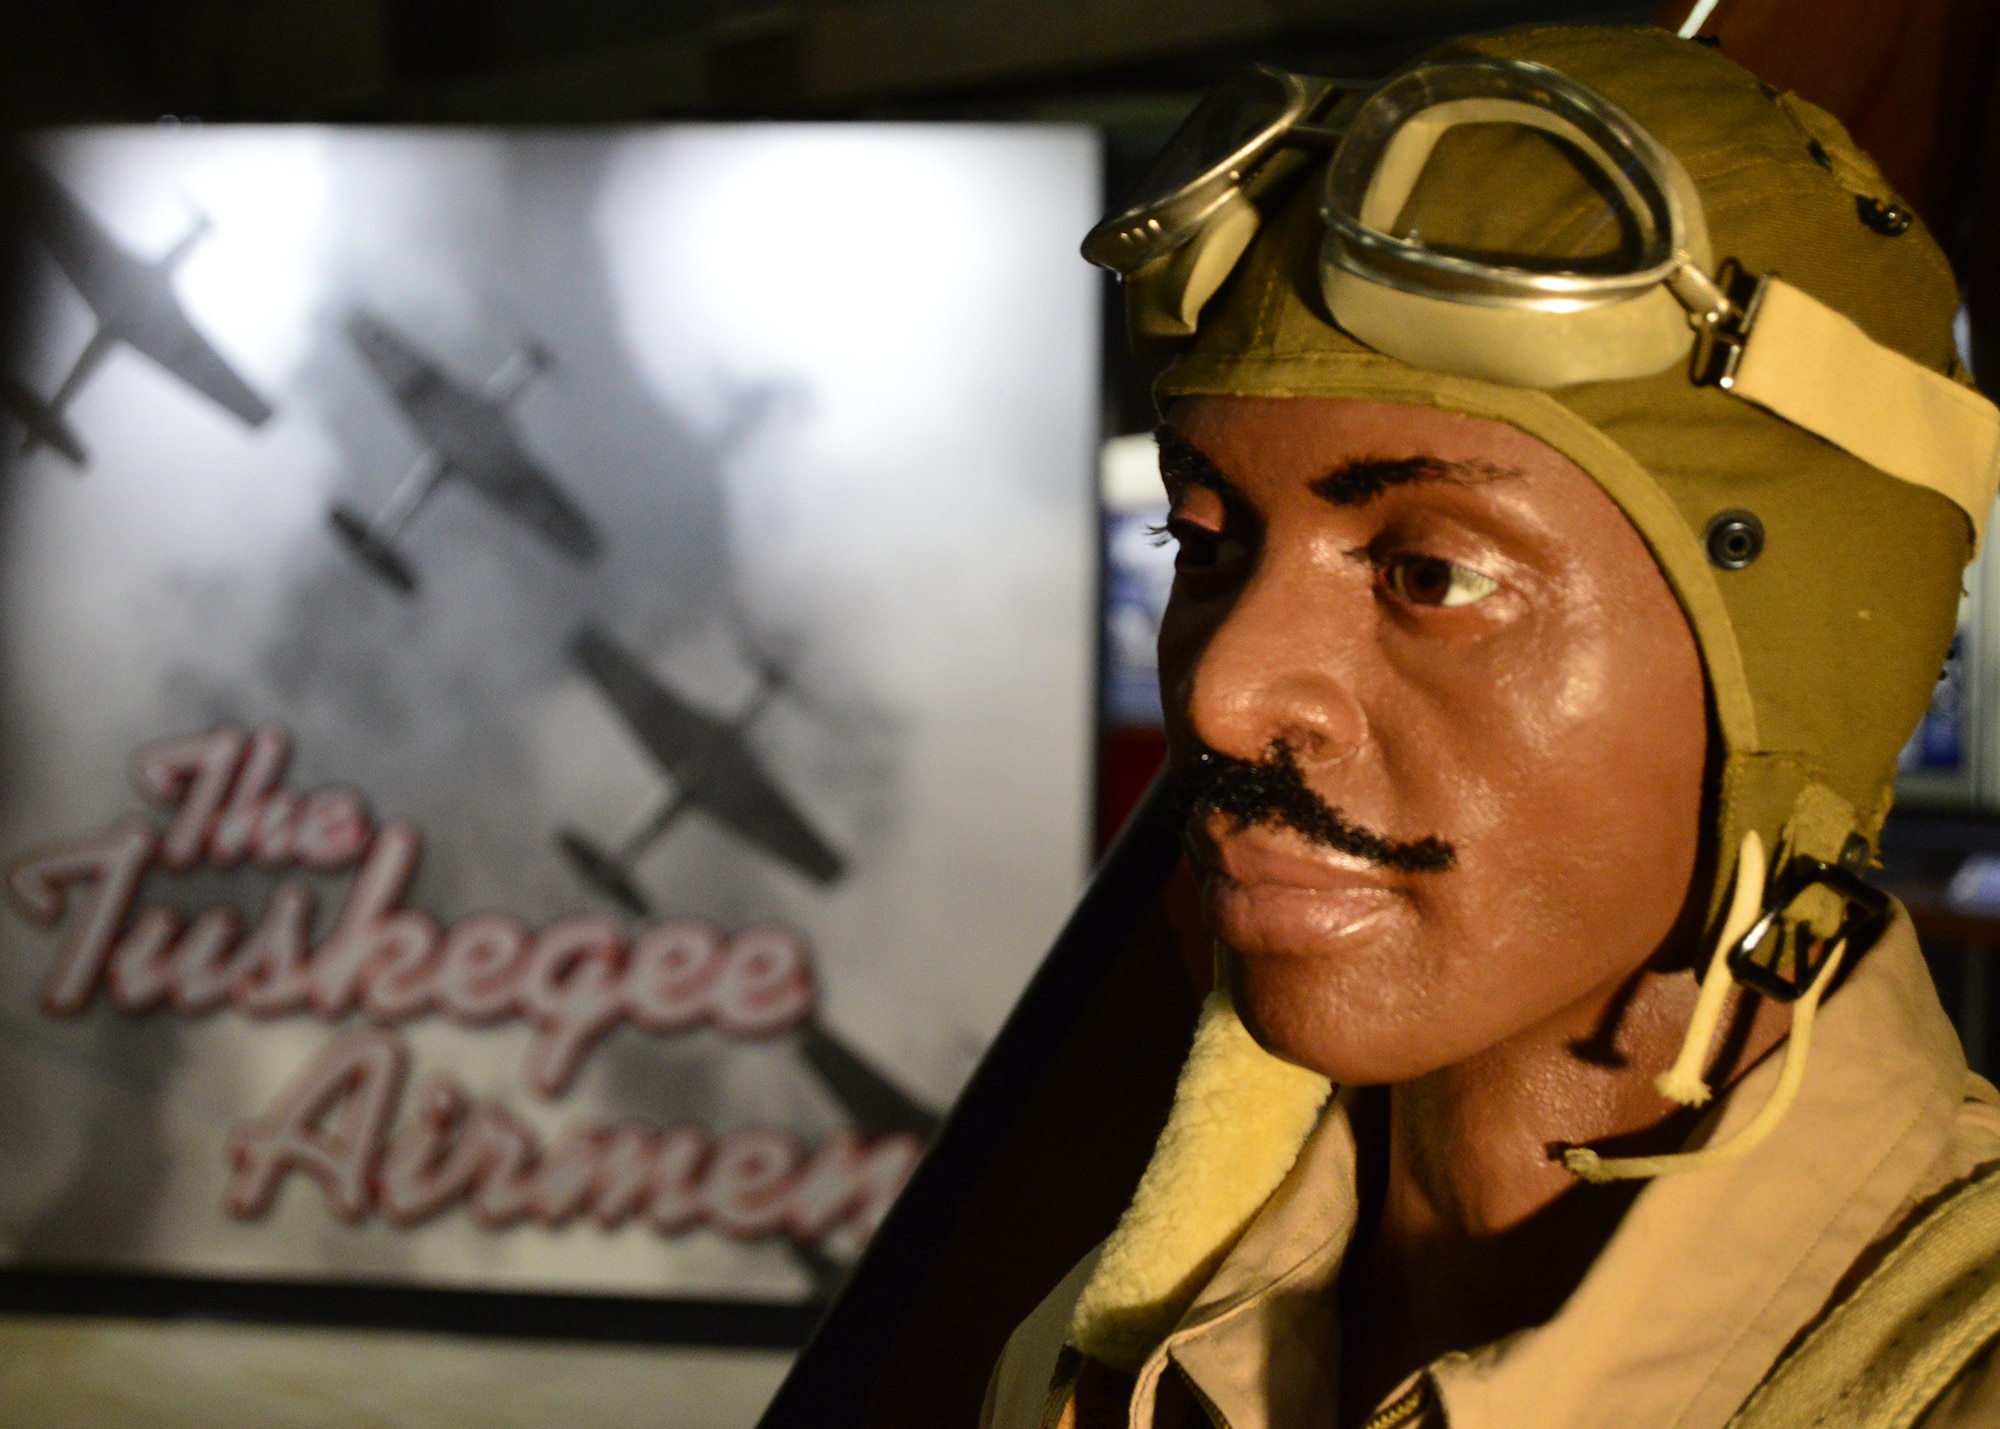 DAYTON, Ohio -- The Tuskegee Airmen diorama depicting a cadet and instructor on display in the WWII Gallery at the National Museum of the U.S. Air Force. (U.S. Air Force photo)
